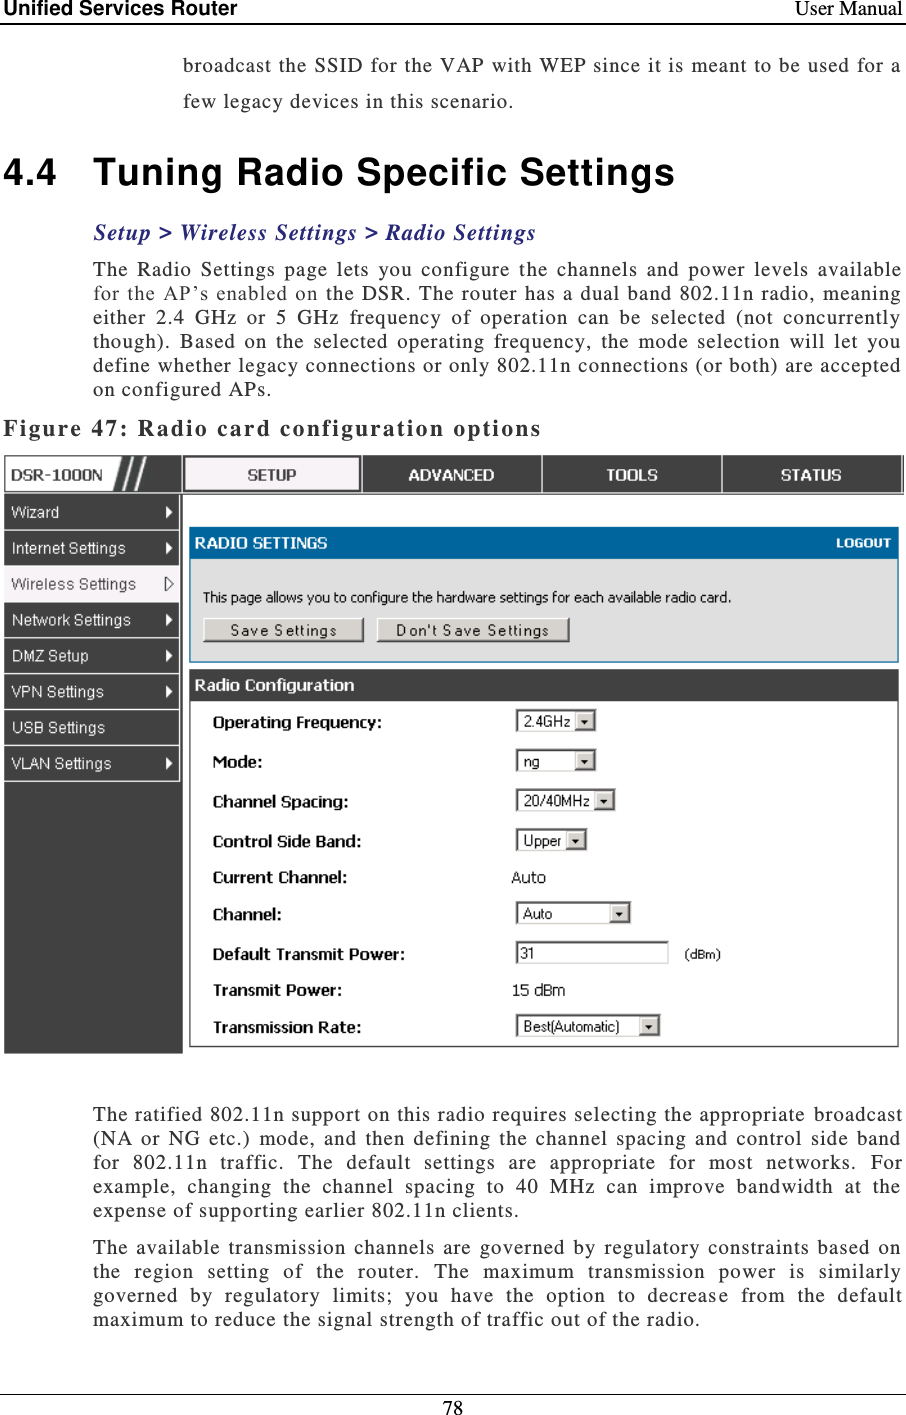 Unified Services Router    User Manual 78  broadcast the SSID for the VAP with WEP since it is meant to be used for a few legacy devices in this scenario.  4.4  Tuning Radio Specific Settings Setup &gt; Wireless Settings &gt; Radio Settings  The  Radio  Settings  page  lets  you  configure  t he  channels  and  power  levels  available for  the AP’s  enabled  on  the  DSR. The router has  a dual band  802.11n  radio, meaning either  2.4  GHz  or  5  GHz  frequency  of  operation  can  be  selected  (not  concurrently though).  Based  on  the  selected  operating  frequency,  the  mode  selection  will  let  you define whether legacy connections or only 802.11n connections (or both) are accepted on configured APs.  Figure 47: Radio card configuratio n options    The ratified 802.11n support on this radio requires selecting the appropriate  broadcast (NA  or  NG  etc.)  mode,  and  then  defining  the  channel  spacing  and  control  side  band for  802.11n  traffic.  The  default  settings  are  appropriate  for  most  networks.  For example,  changing  the  channel  spacing  to  40  MHz  can  improve  bandwidth  at  the expense of supporting earlier 802.11n clients.  The  available  transmission  channels  are  governed  by  regulatory  constraints  based  on the  region  setting  of  the  router.  The  maximum  transmission  power  is  similarly governed  by  regulatory  limits;  you  have  the  option  to  decreas e  from  the  default maximum to reduce the signal strength of traffic out of the radio.   